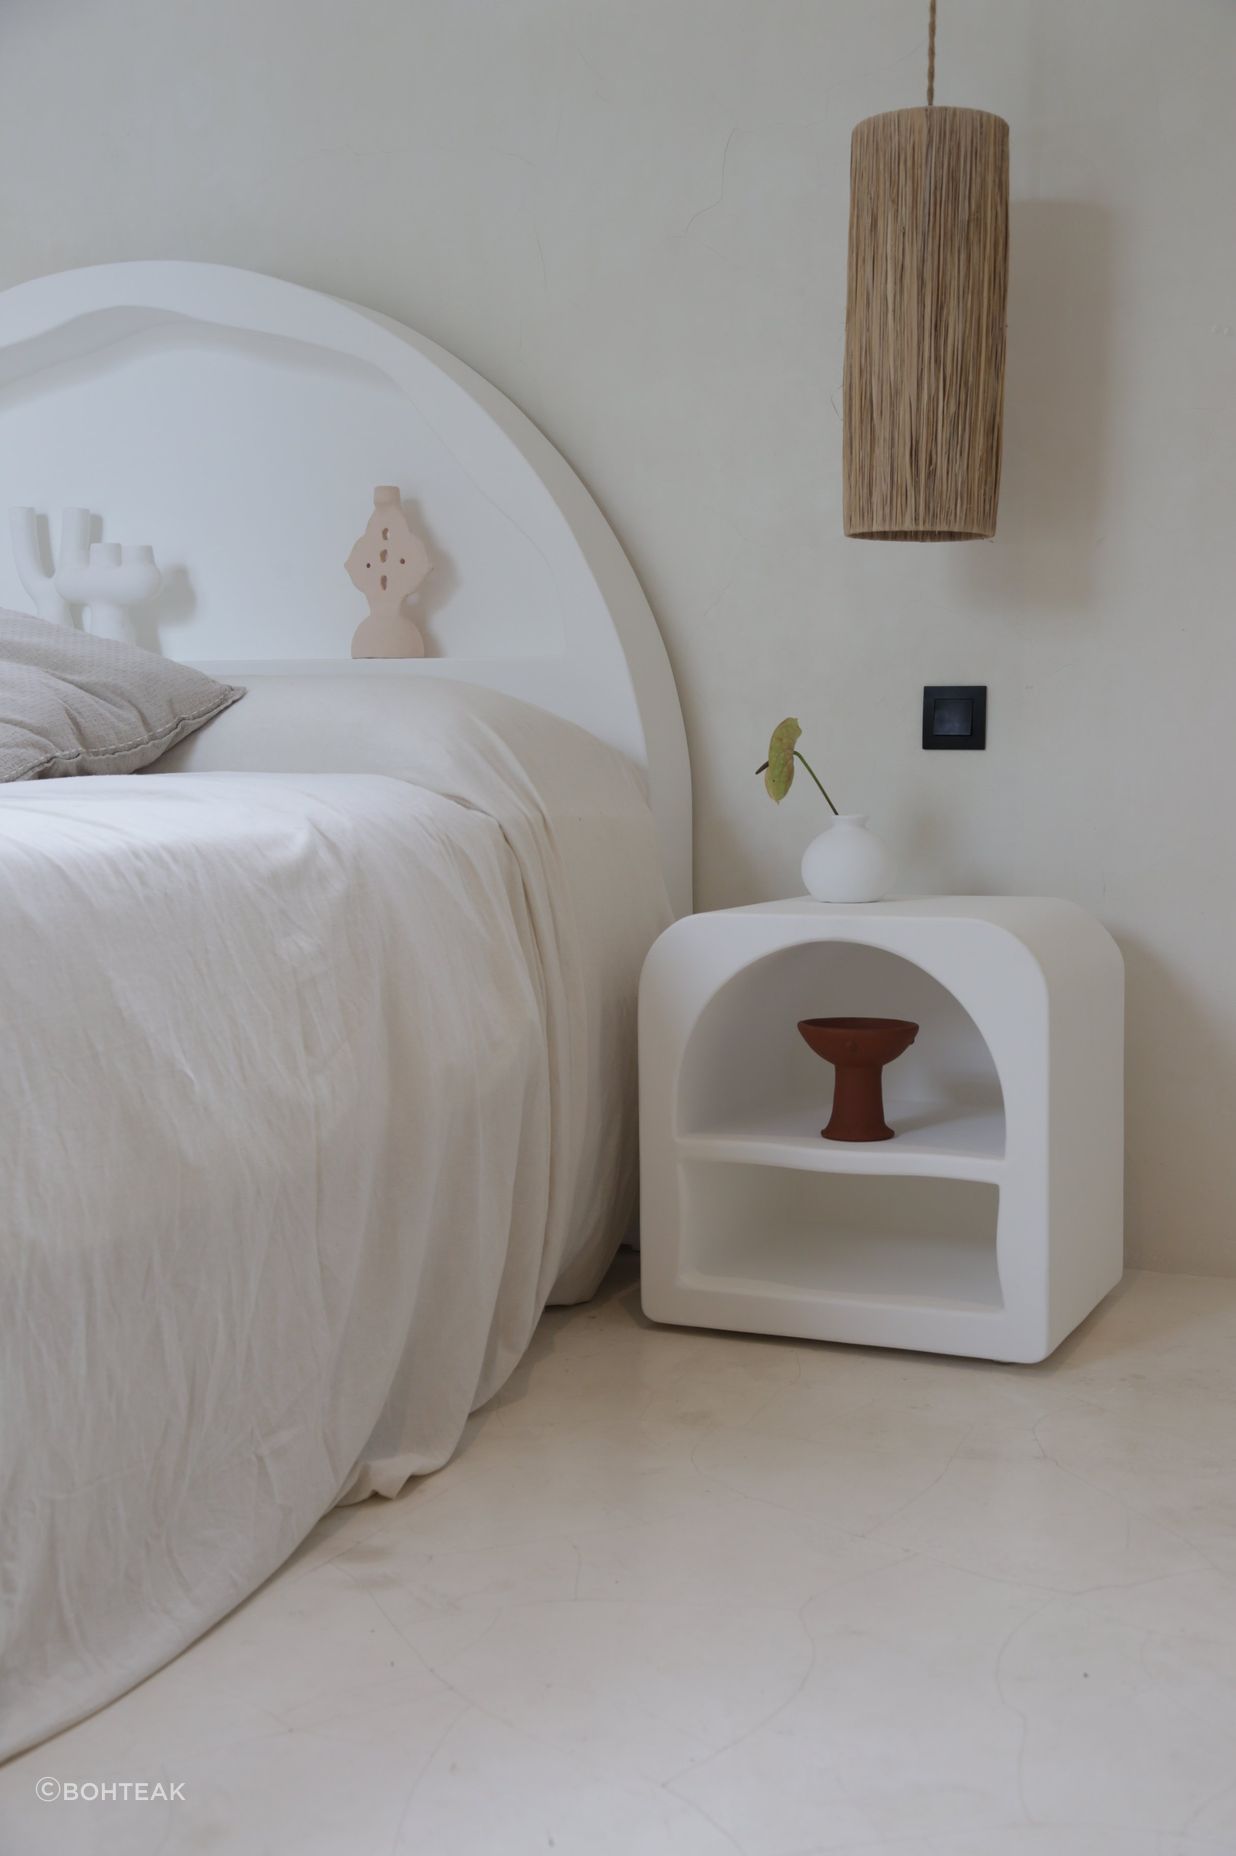 Mediterranean bedside tables, such as this Majorca Side Table, offer clean design and a unique take on practical storage spaces.